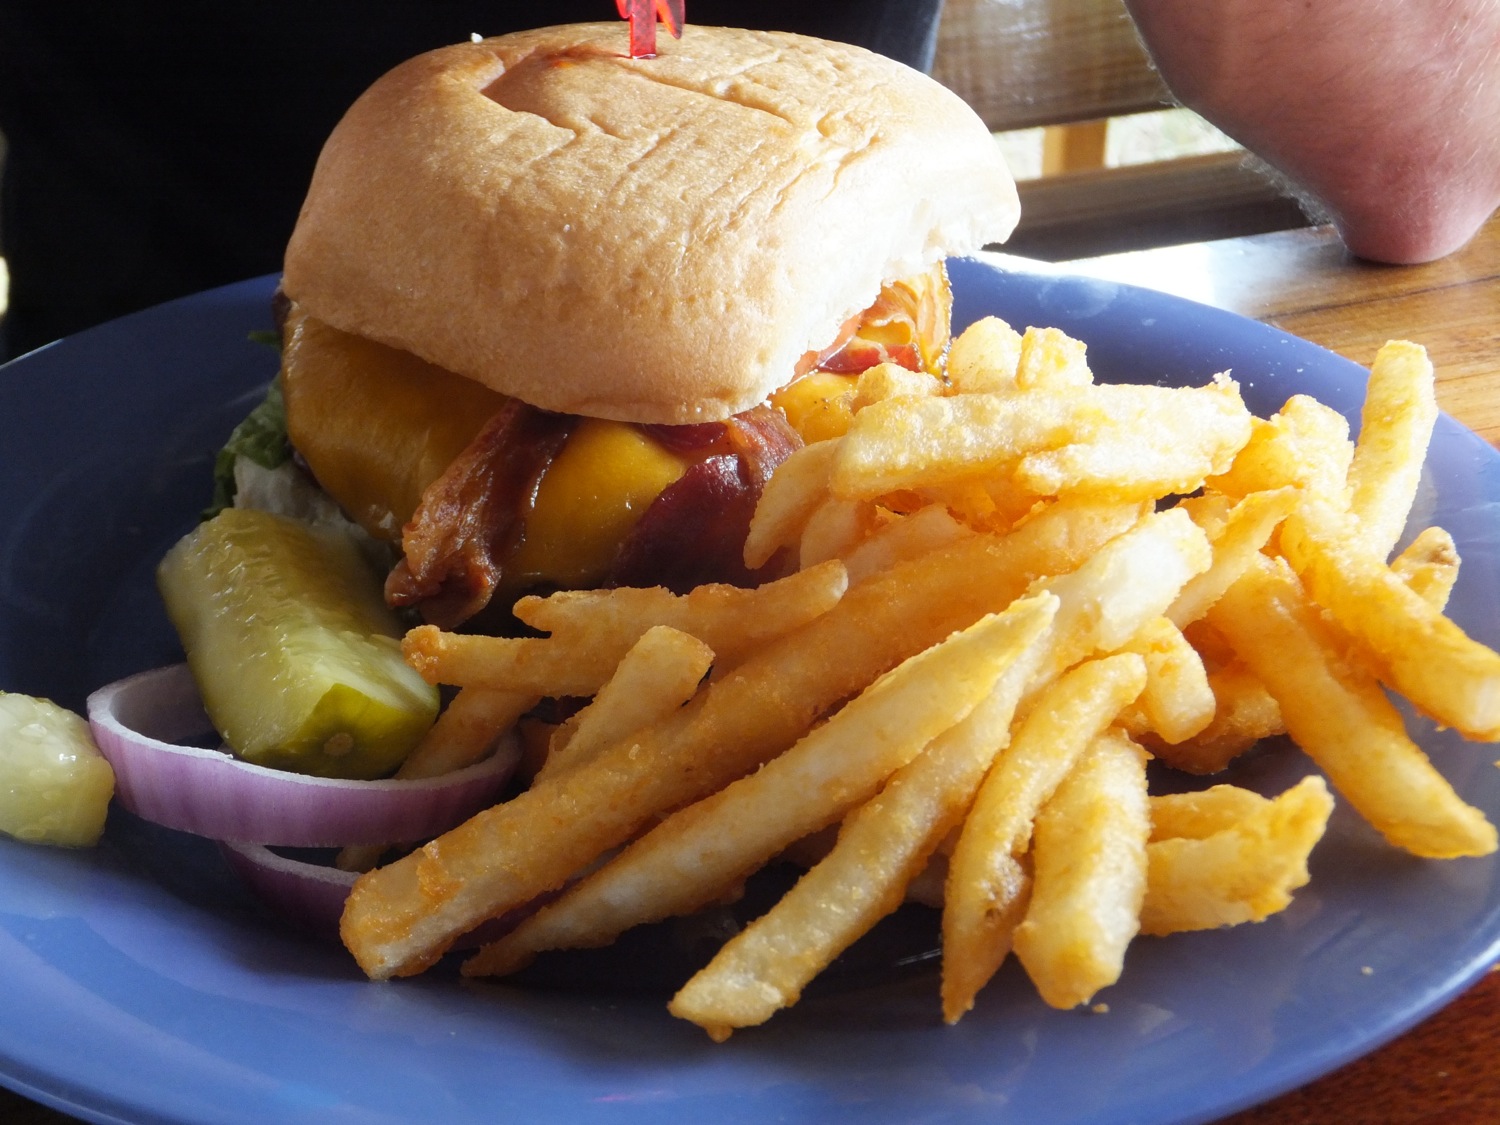 What is a typical American lunch? - Foodly